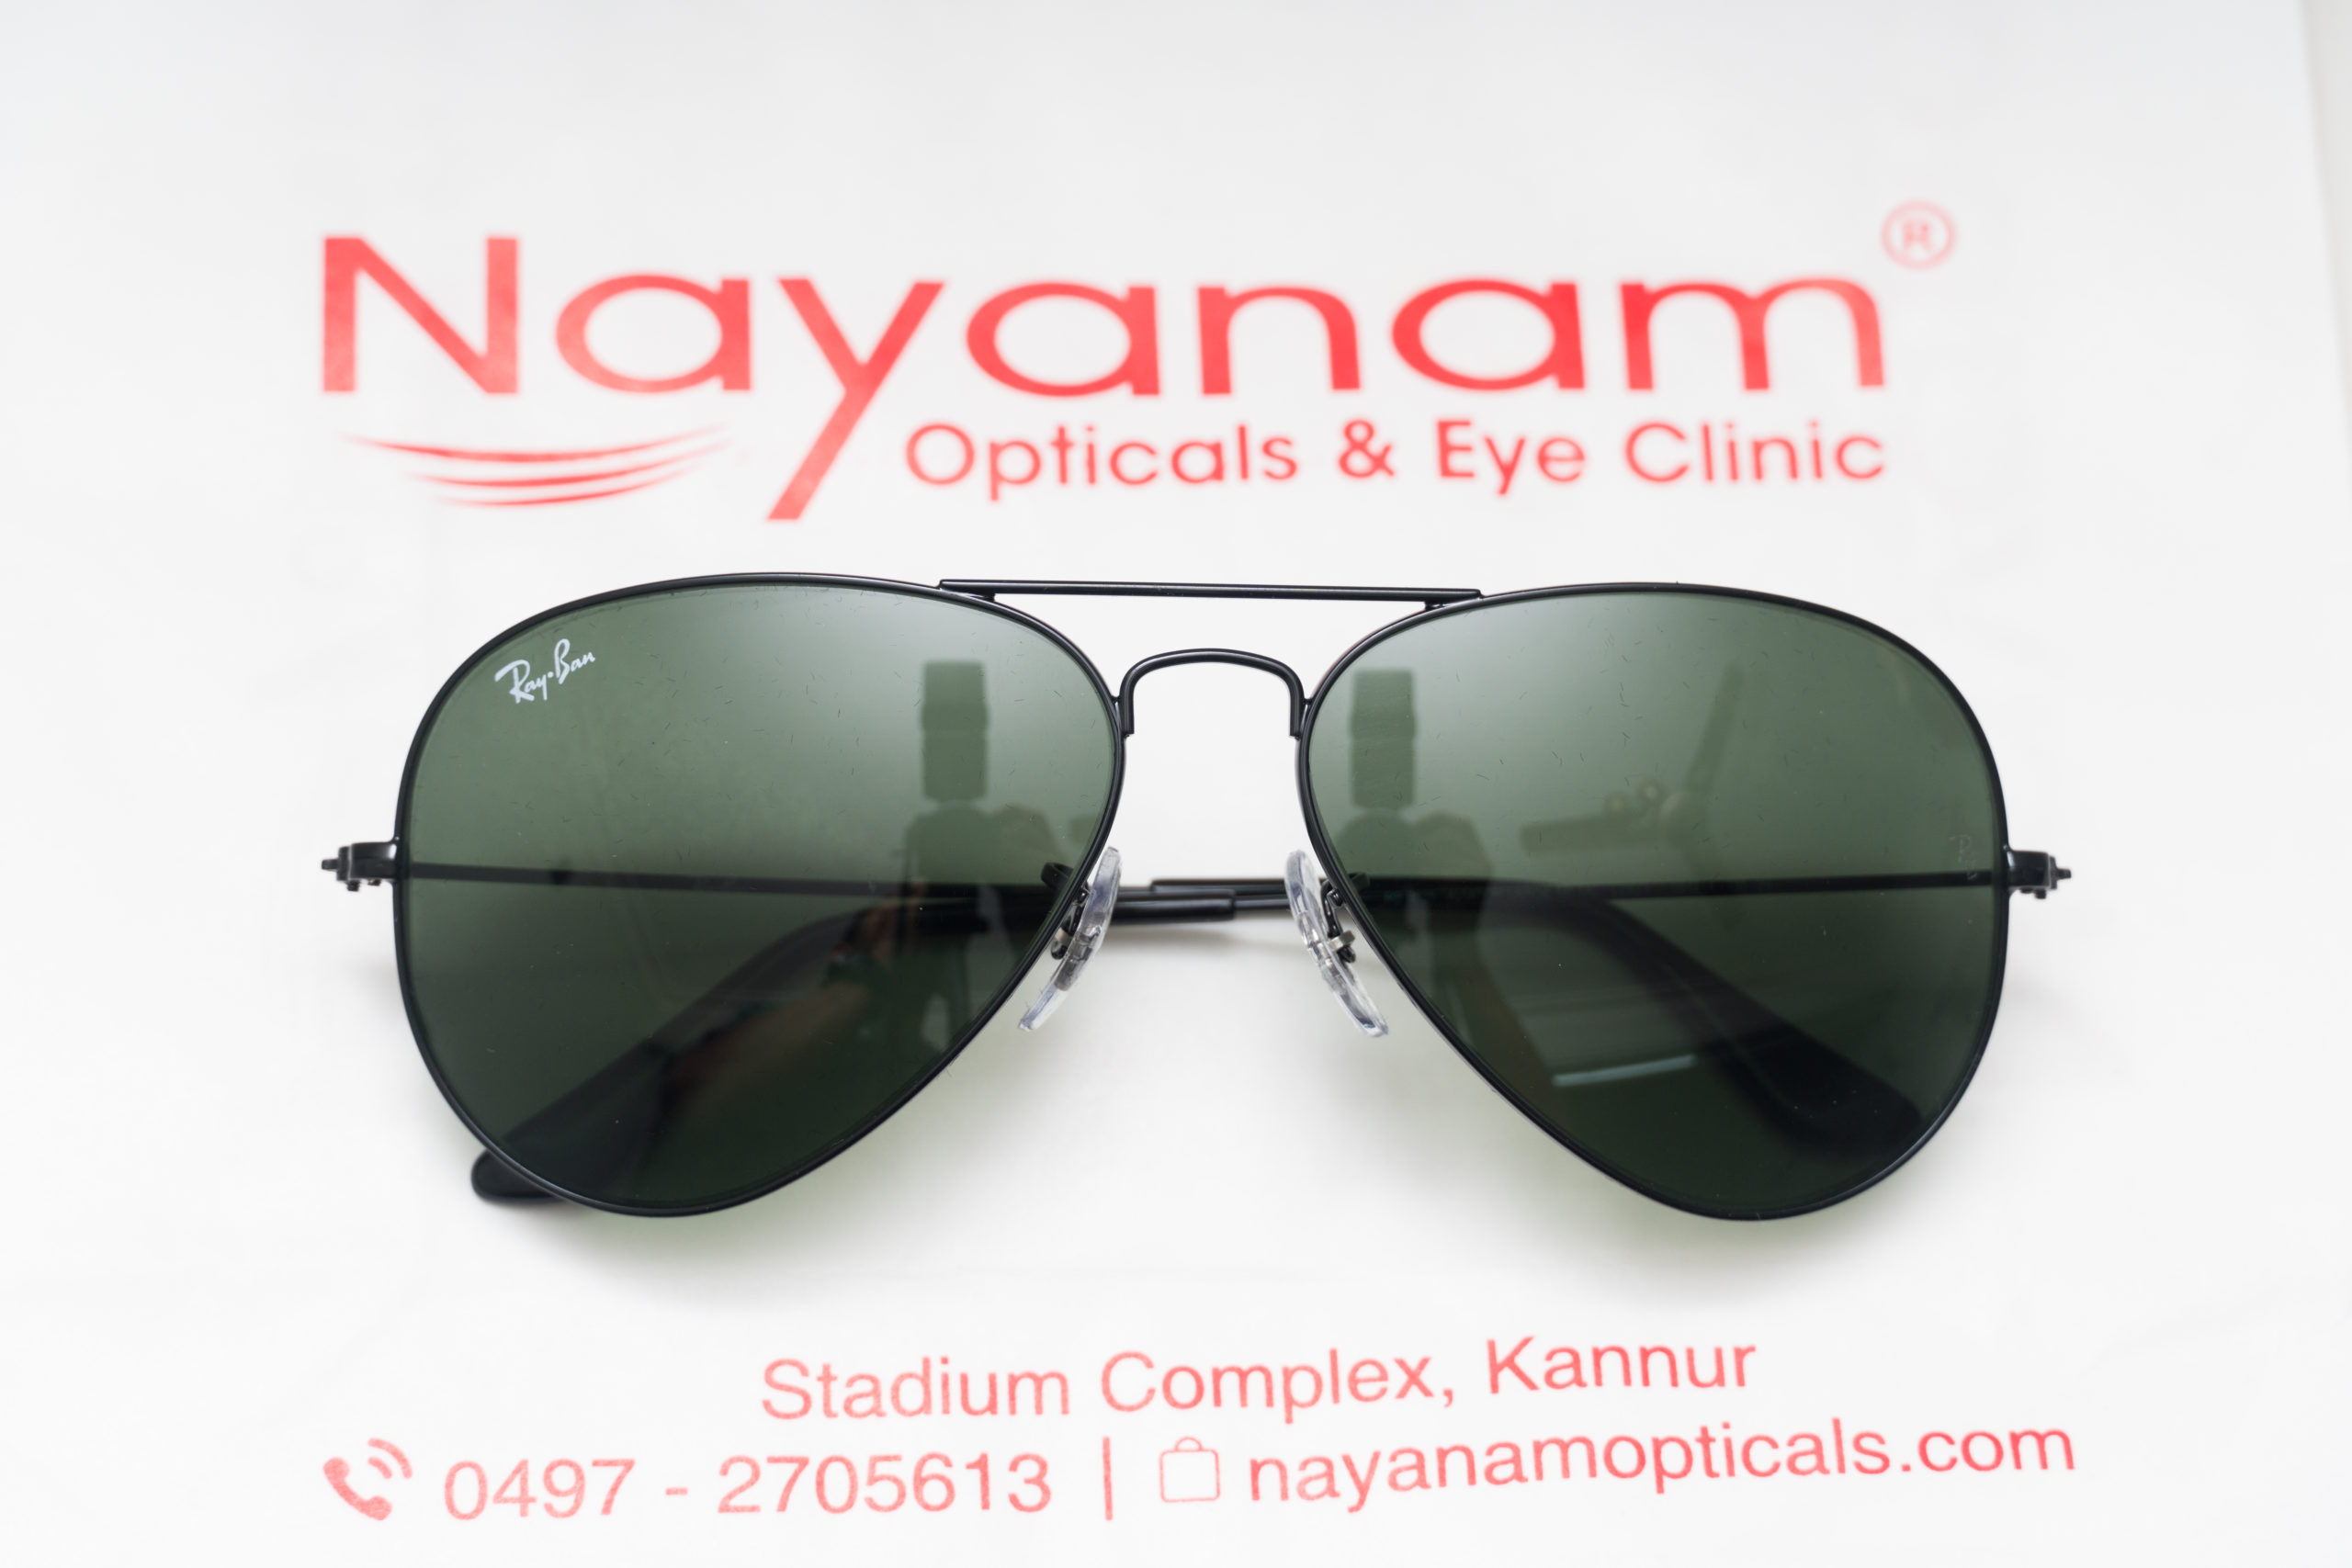 Nayanam Optical Centre Payyanur, Optical Centre in Payyanur, Opticals in Payyannur, Ray-Ban dealers in payyanur, Opticians in Payyanur, Optical shops in Kerala, Opticians in Kerala, Buy spectacles online from kerala, online opticians from kerala, leading opticians from kerala, eye hospitals in kerala, eye specialists in kerala, spectacle frames kerala, branded spectacle frames kerala, contact lenses kerala, ophthalmic lenses kerala, Ejones opticals, optical lenses kerala, progressive lenses, bi focal lenses kerala, high index lenses kerala, compressed lenses kerala, varifocal lenses kerala, multifocal lenses kerala, crizal lenses kerala, crizal a2 lenses kerala, shamir lenses kerala, airwear lenses kerala, antireflective lenses kerala, antiglare lenses kerala, day and night lenses kerala, photochromatic lenses kerala, polarised lenses kerala, polycarbonate lenses kerala, mr8 lenses kerala, scratch resistant lenses kerala, light weight lenses kerala, transition lenses kerala, varilux lenses kerala, vision correction kerala, vision problems kerala, free eye testing kerala, rayban kerala, cataract lenses kerala, cataract surgery kerala, presbiopic lenses kerala, vogue frames and sunglasses kerala, oakley frames and sunglasses kerala, adidas frames and sunglasses kerala, safilo frames kerala, carrera frames and sunglasses kerala, prada kerala, versace frames and sunglasses kerala, montblanc frames kerala, police frames and sunglasses kerala, puma frames and sunglasses kerala, emporio armani kerala, silhouette kerala, optimed kerala, hoya lenses kerala, zeiss lenses kerala, asahi lenses kerala, AO lenses kerala, essilor lenses kerala, Bausch and lomb contact lenses kerala, Johnson and Johnson contact lenses kerala, acuvue contact lenses kerala, nikkon lenses kerala, kodak lenses kerala, fast track sunglasses, power glass kerala, powered sunglasses kerala, lens cart kerala, lens and frames kerala, prescription sunglasses kerala, contact lens solution kerala, Looking to buy best online opticians or glasses? nayanamopticals.com is the first and longest serving successful online optical store in India.